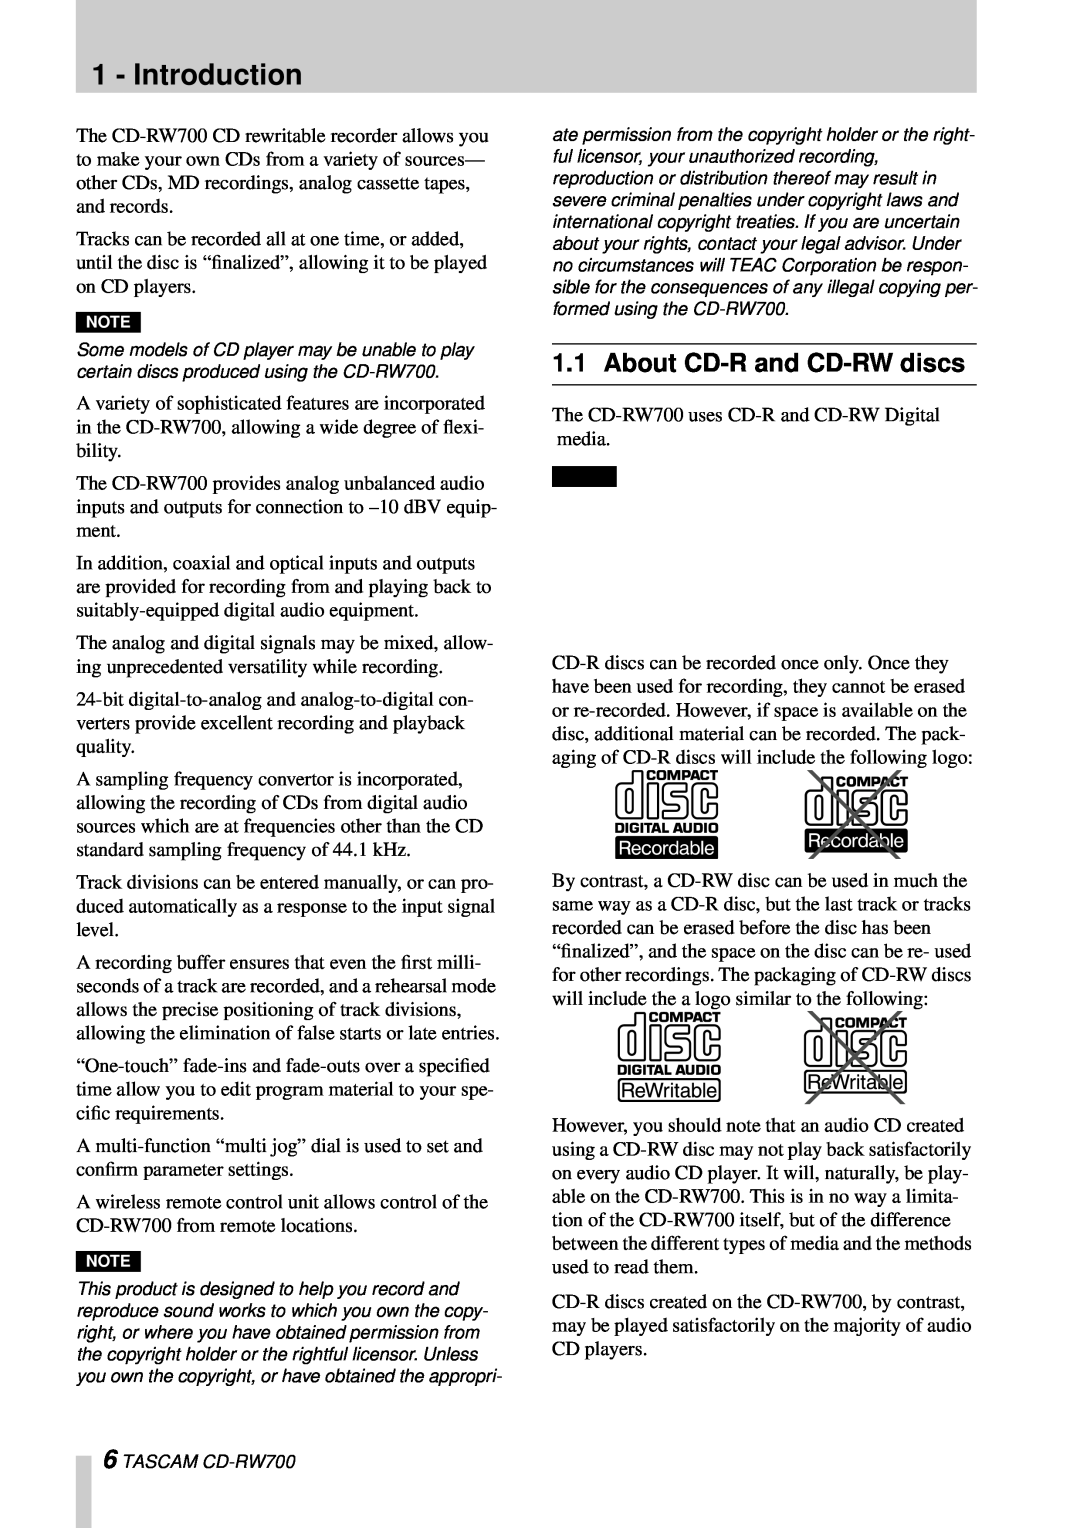 Tascam CD-RW700 owner manual Introduction, About CD-Rand CD-RWdiscs 